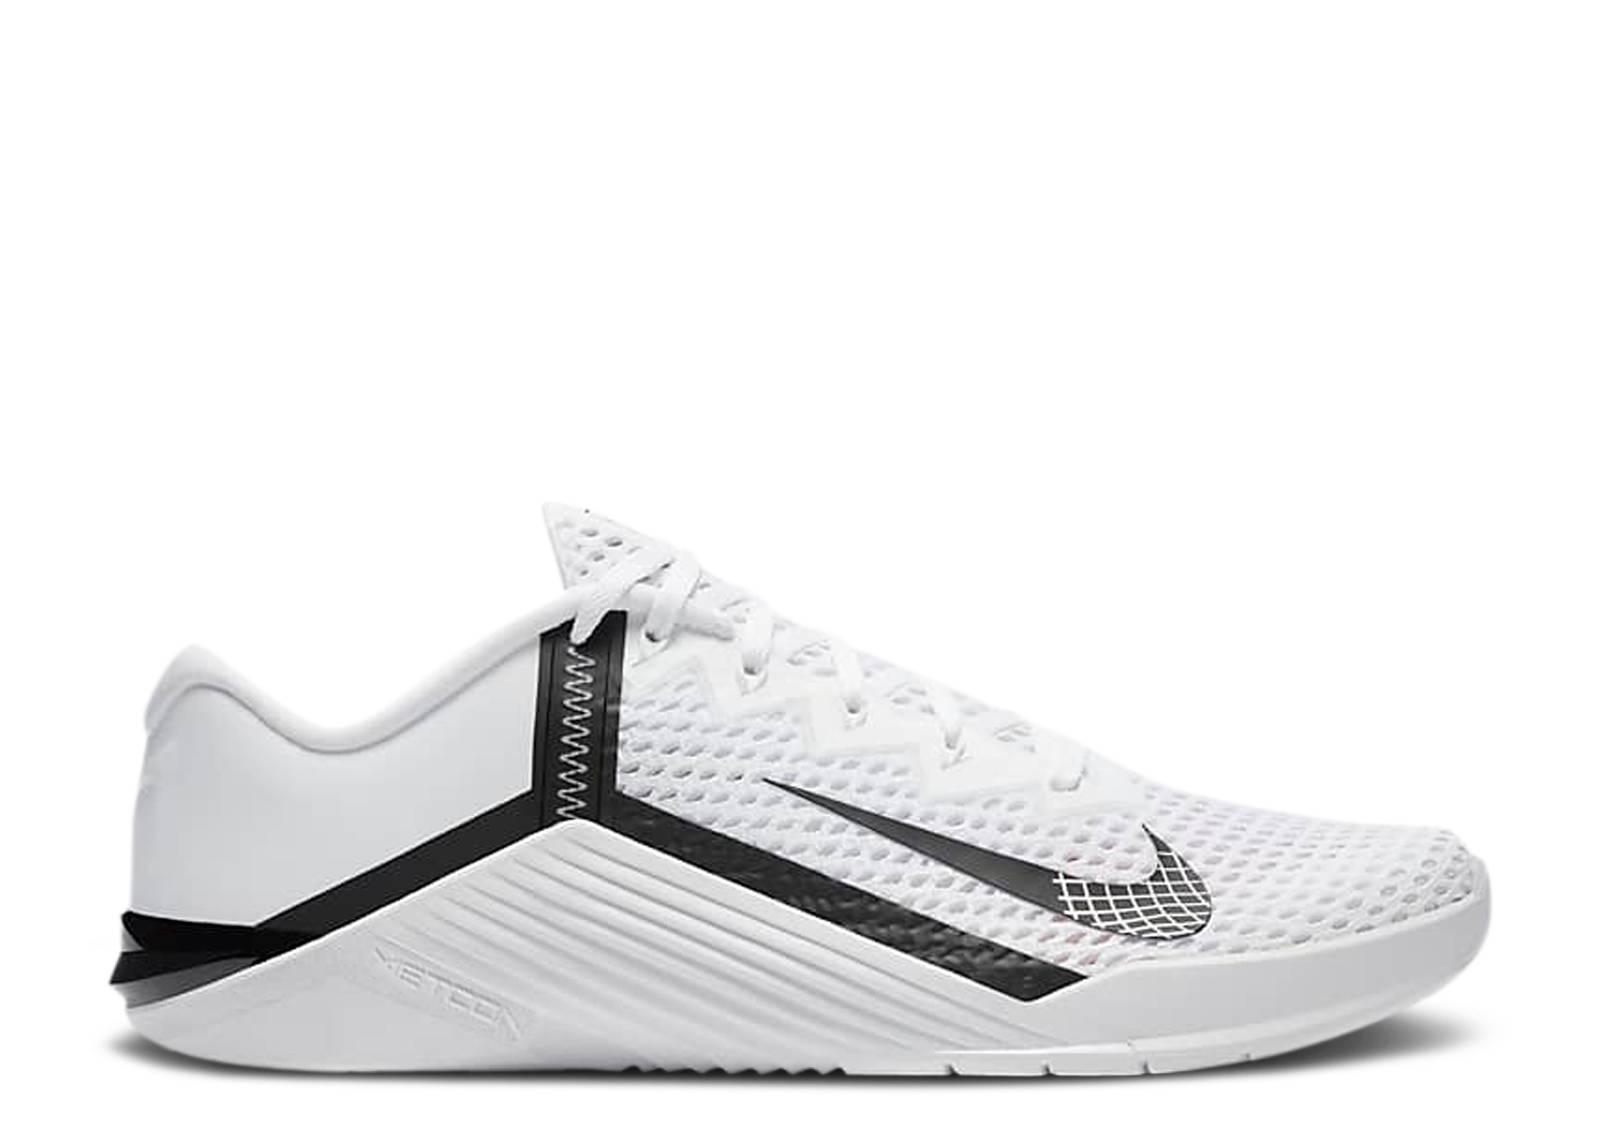 Nike Rubber Metcon 6 Training Shoe (white) for Men - Save 29% - Lyst